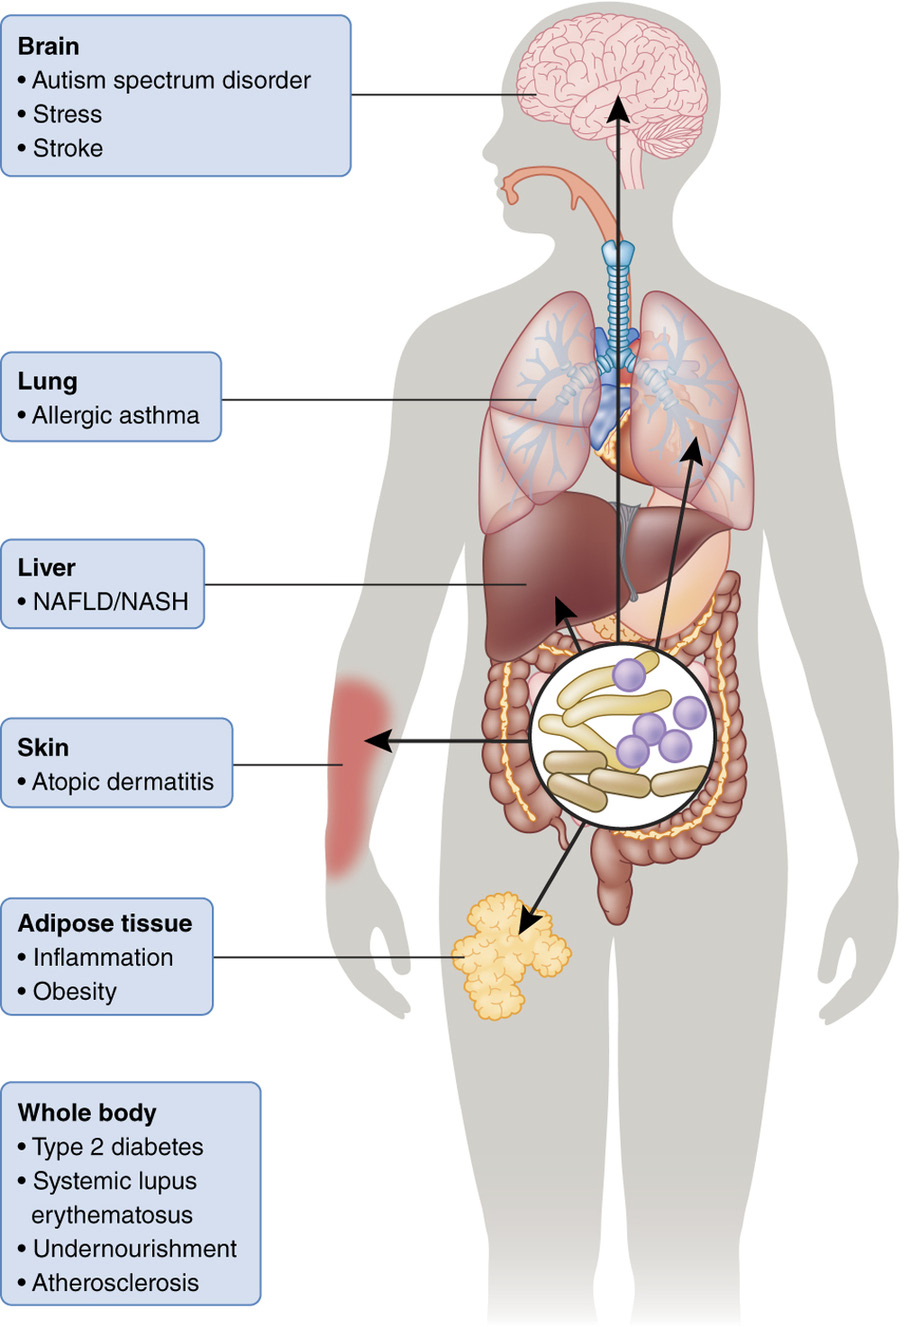 Microbiome Changes and Effects on the Body .jpg